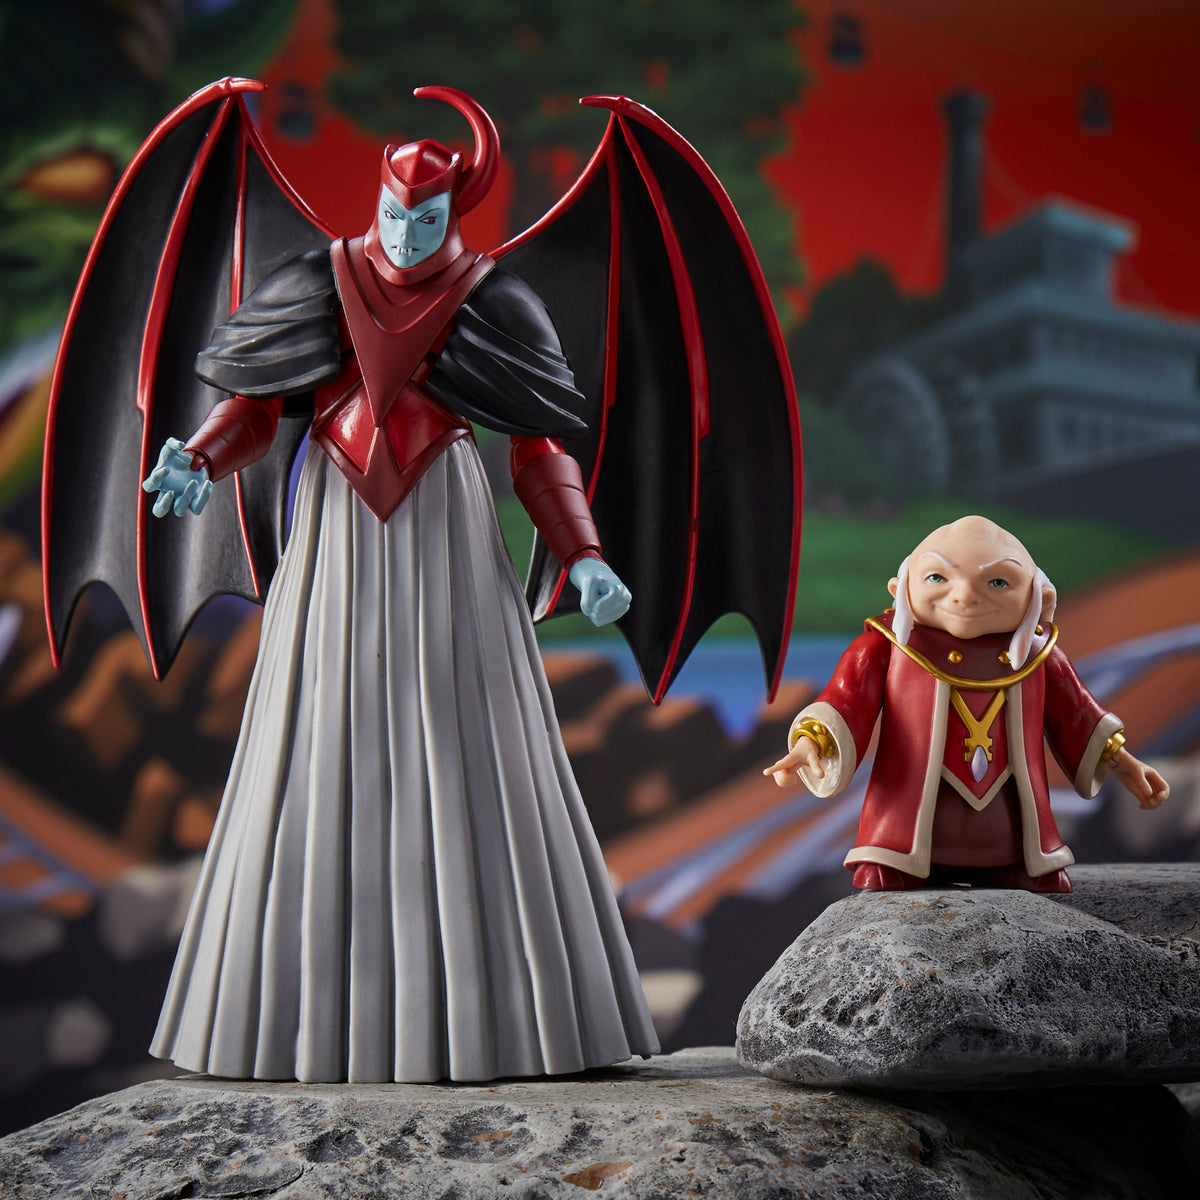  Diamond Select Toys Dungeons & Dragons Animated Gallery: Venger  PVC Statue : Toys & Games